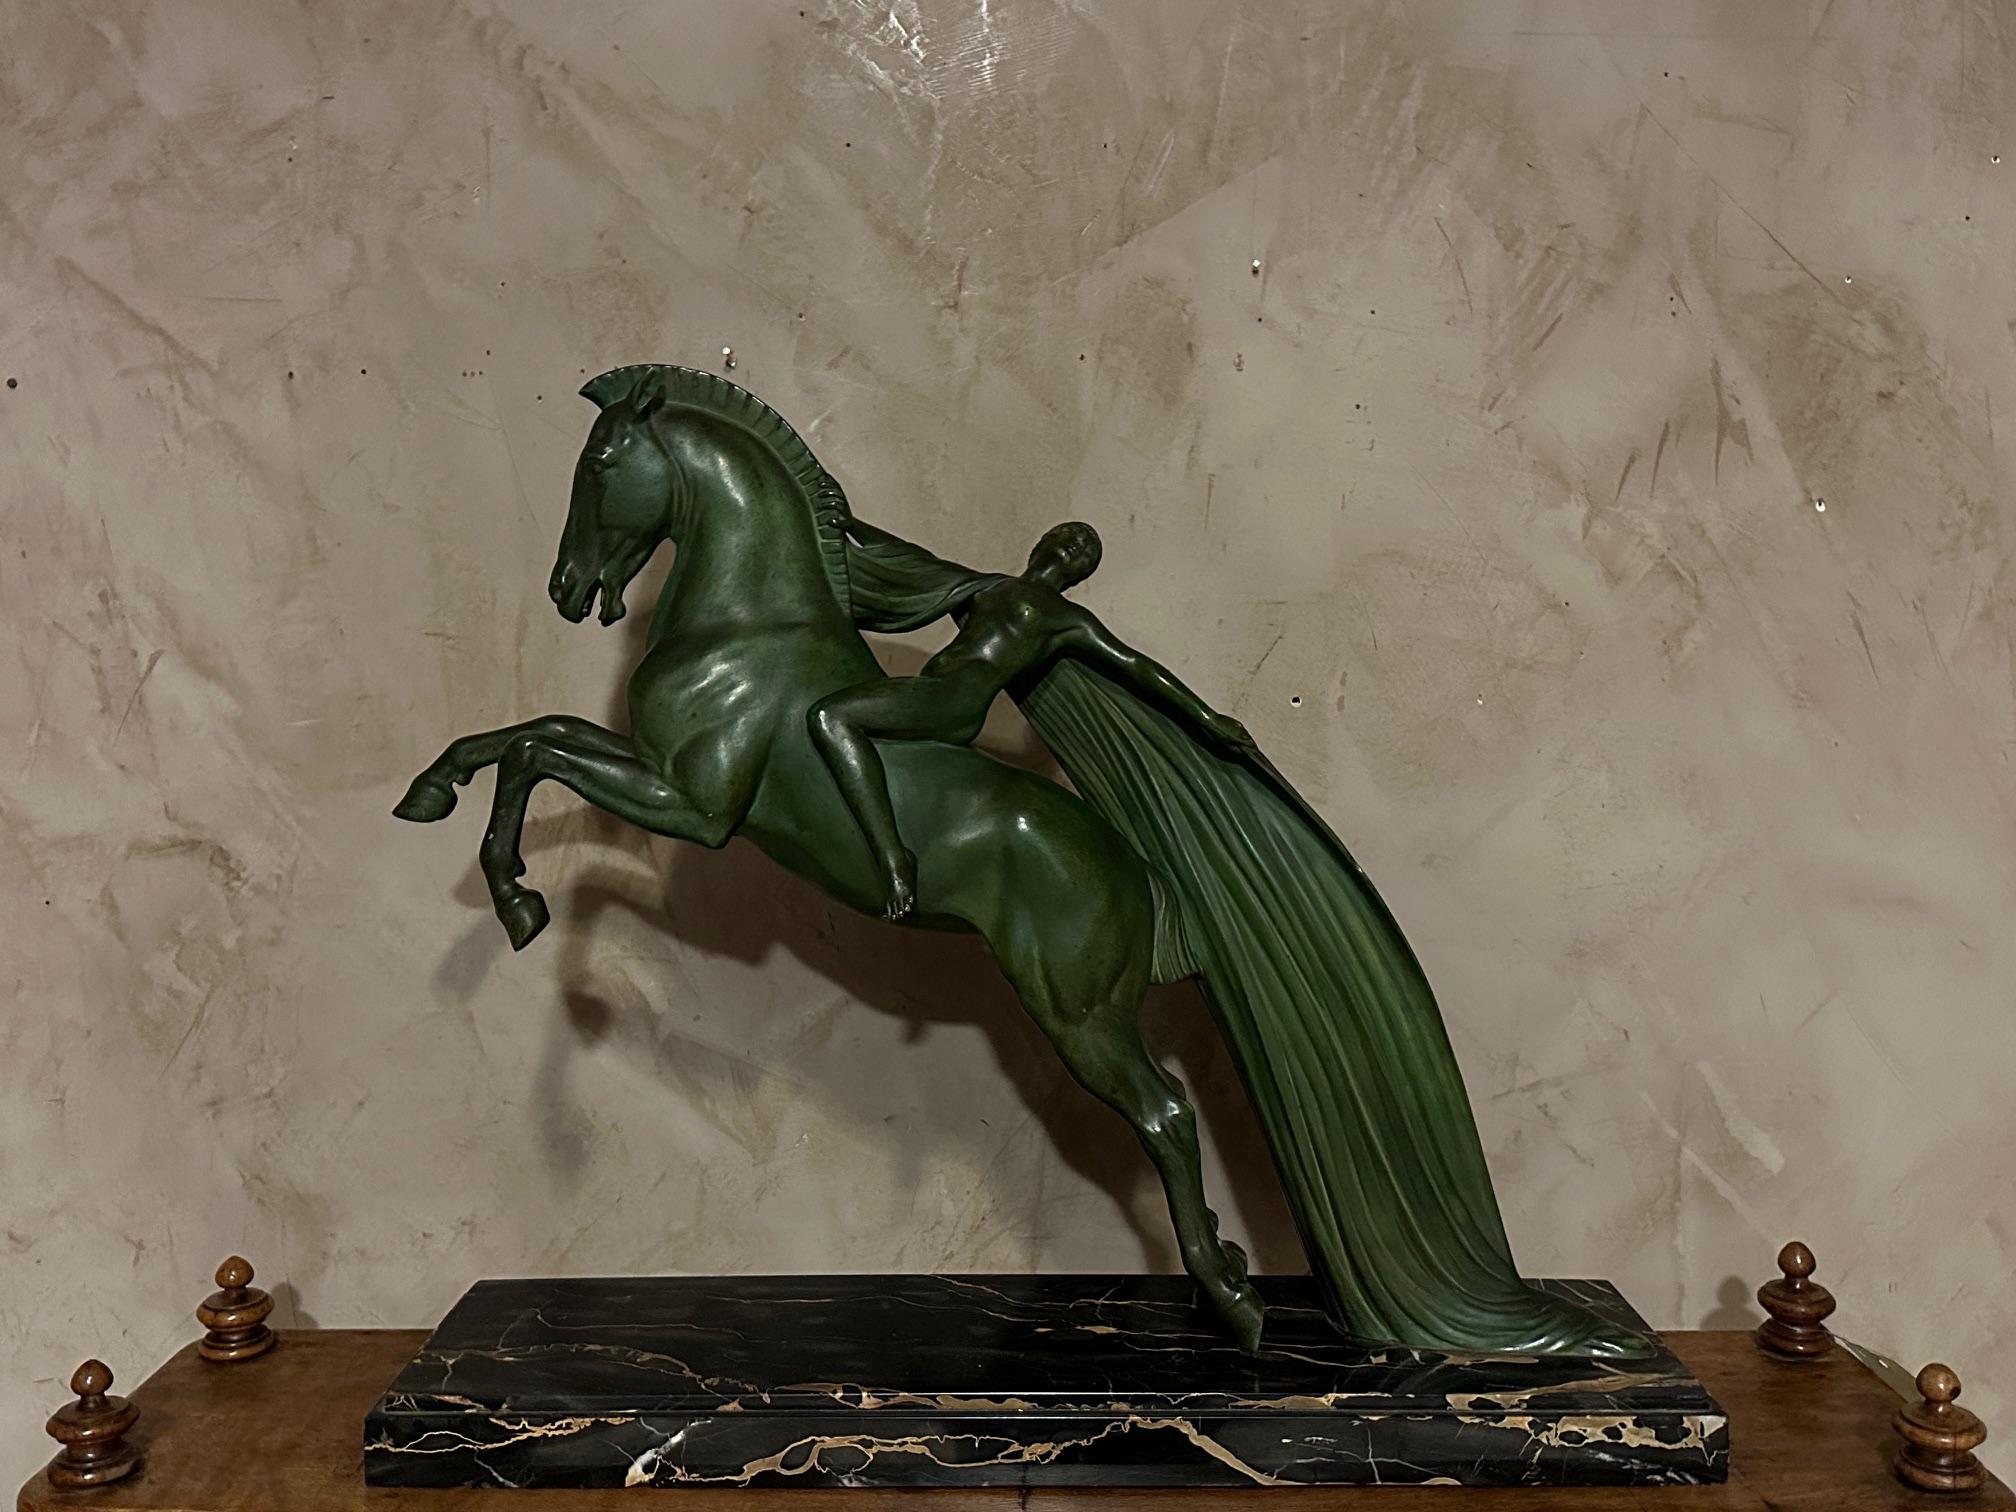 Magnificent sculpture in metal dating from the art deco period representing a woman riding a horse. Signed by the artist C.Charles on the base. 
Beautiful green patina.
This piece was made by the workshop of Max Le Verrier.
This fluid figure